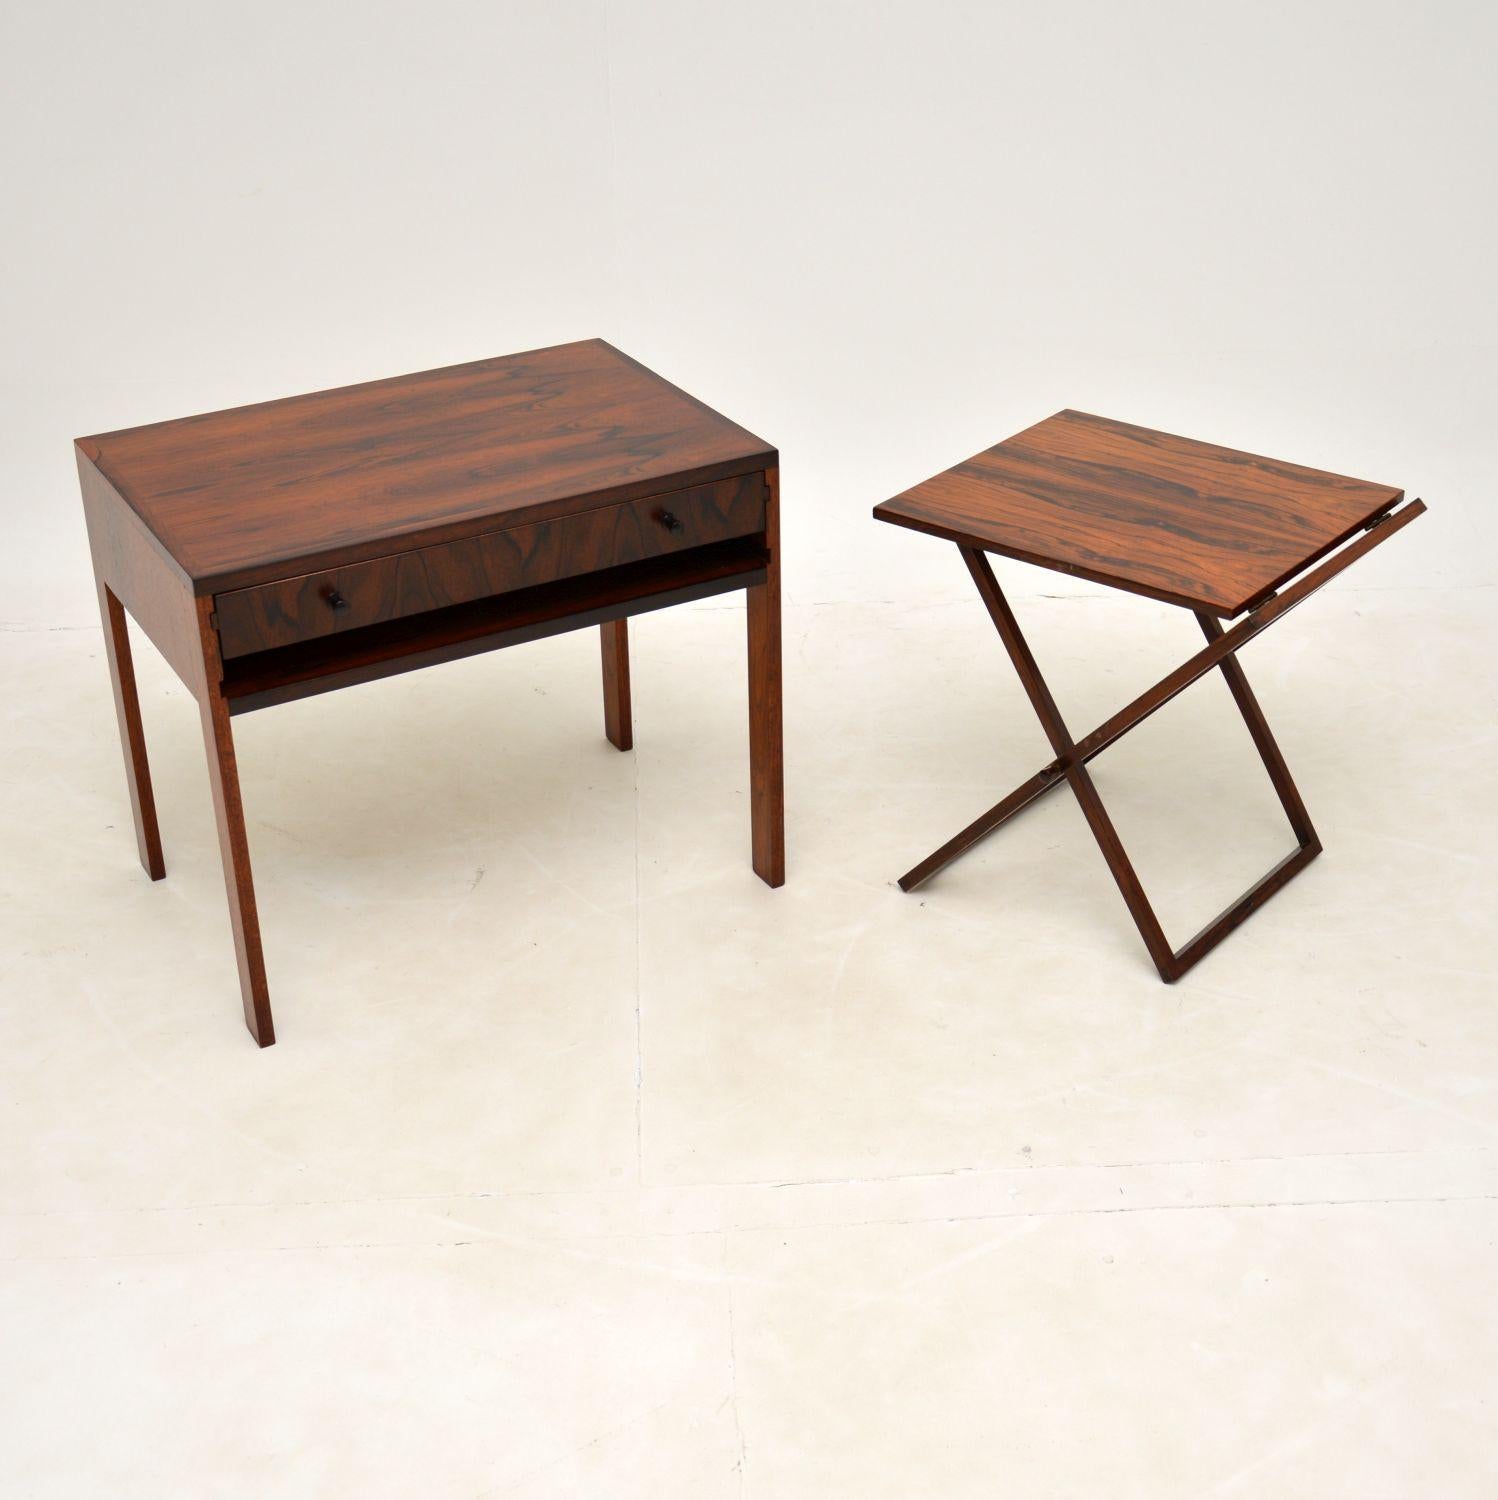 A stunning and rare design, these nesting tables were designed by Illum Wikkelso. They were made by CFC Silkeborg, and they date from the 1960’s.

They are of absolutely amazing quality and design, this particular set has an unusual twist. It is